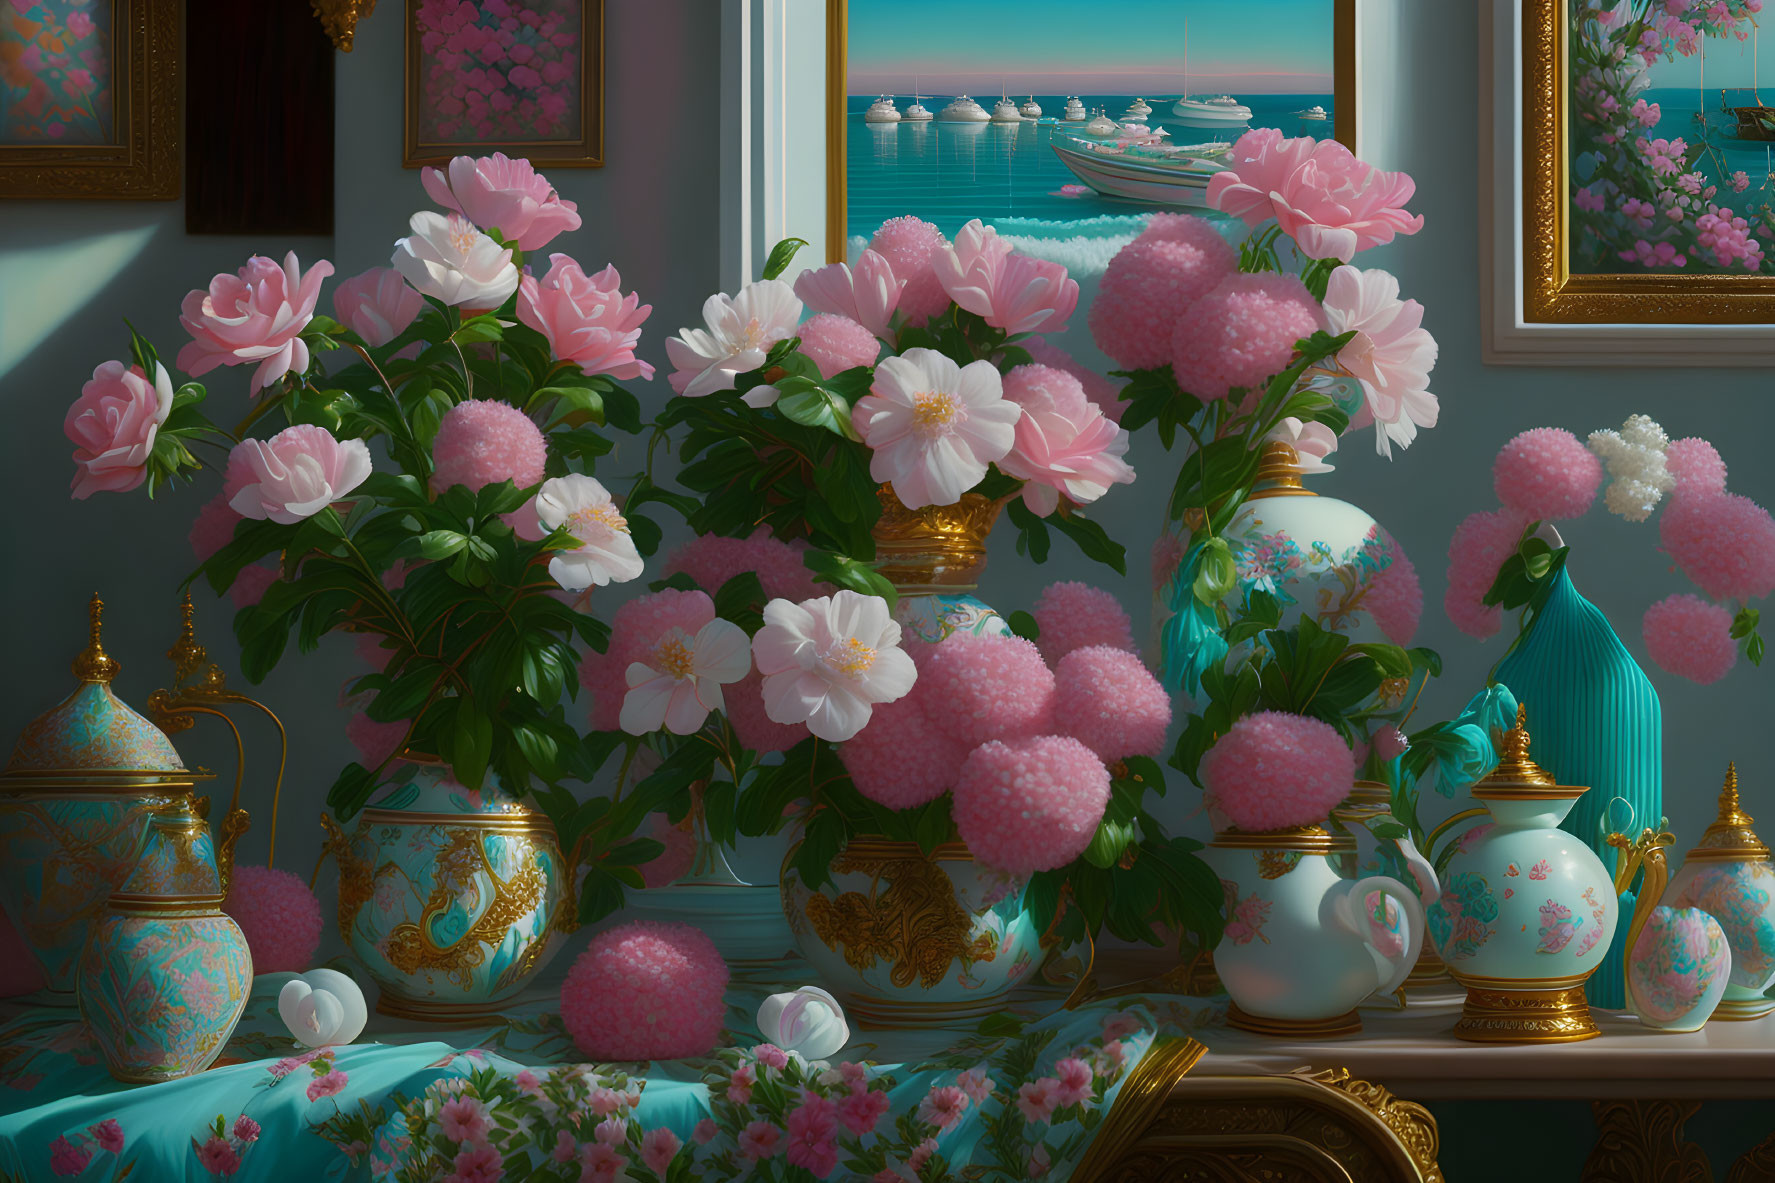 Luxurious room with pink flowers, golden teapots, porcelain, and sailboats view.